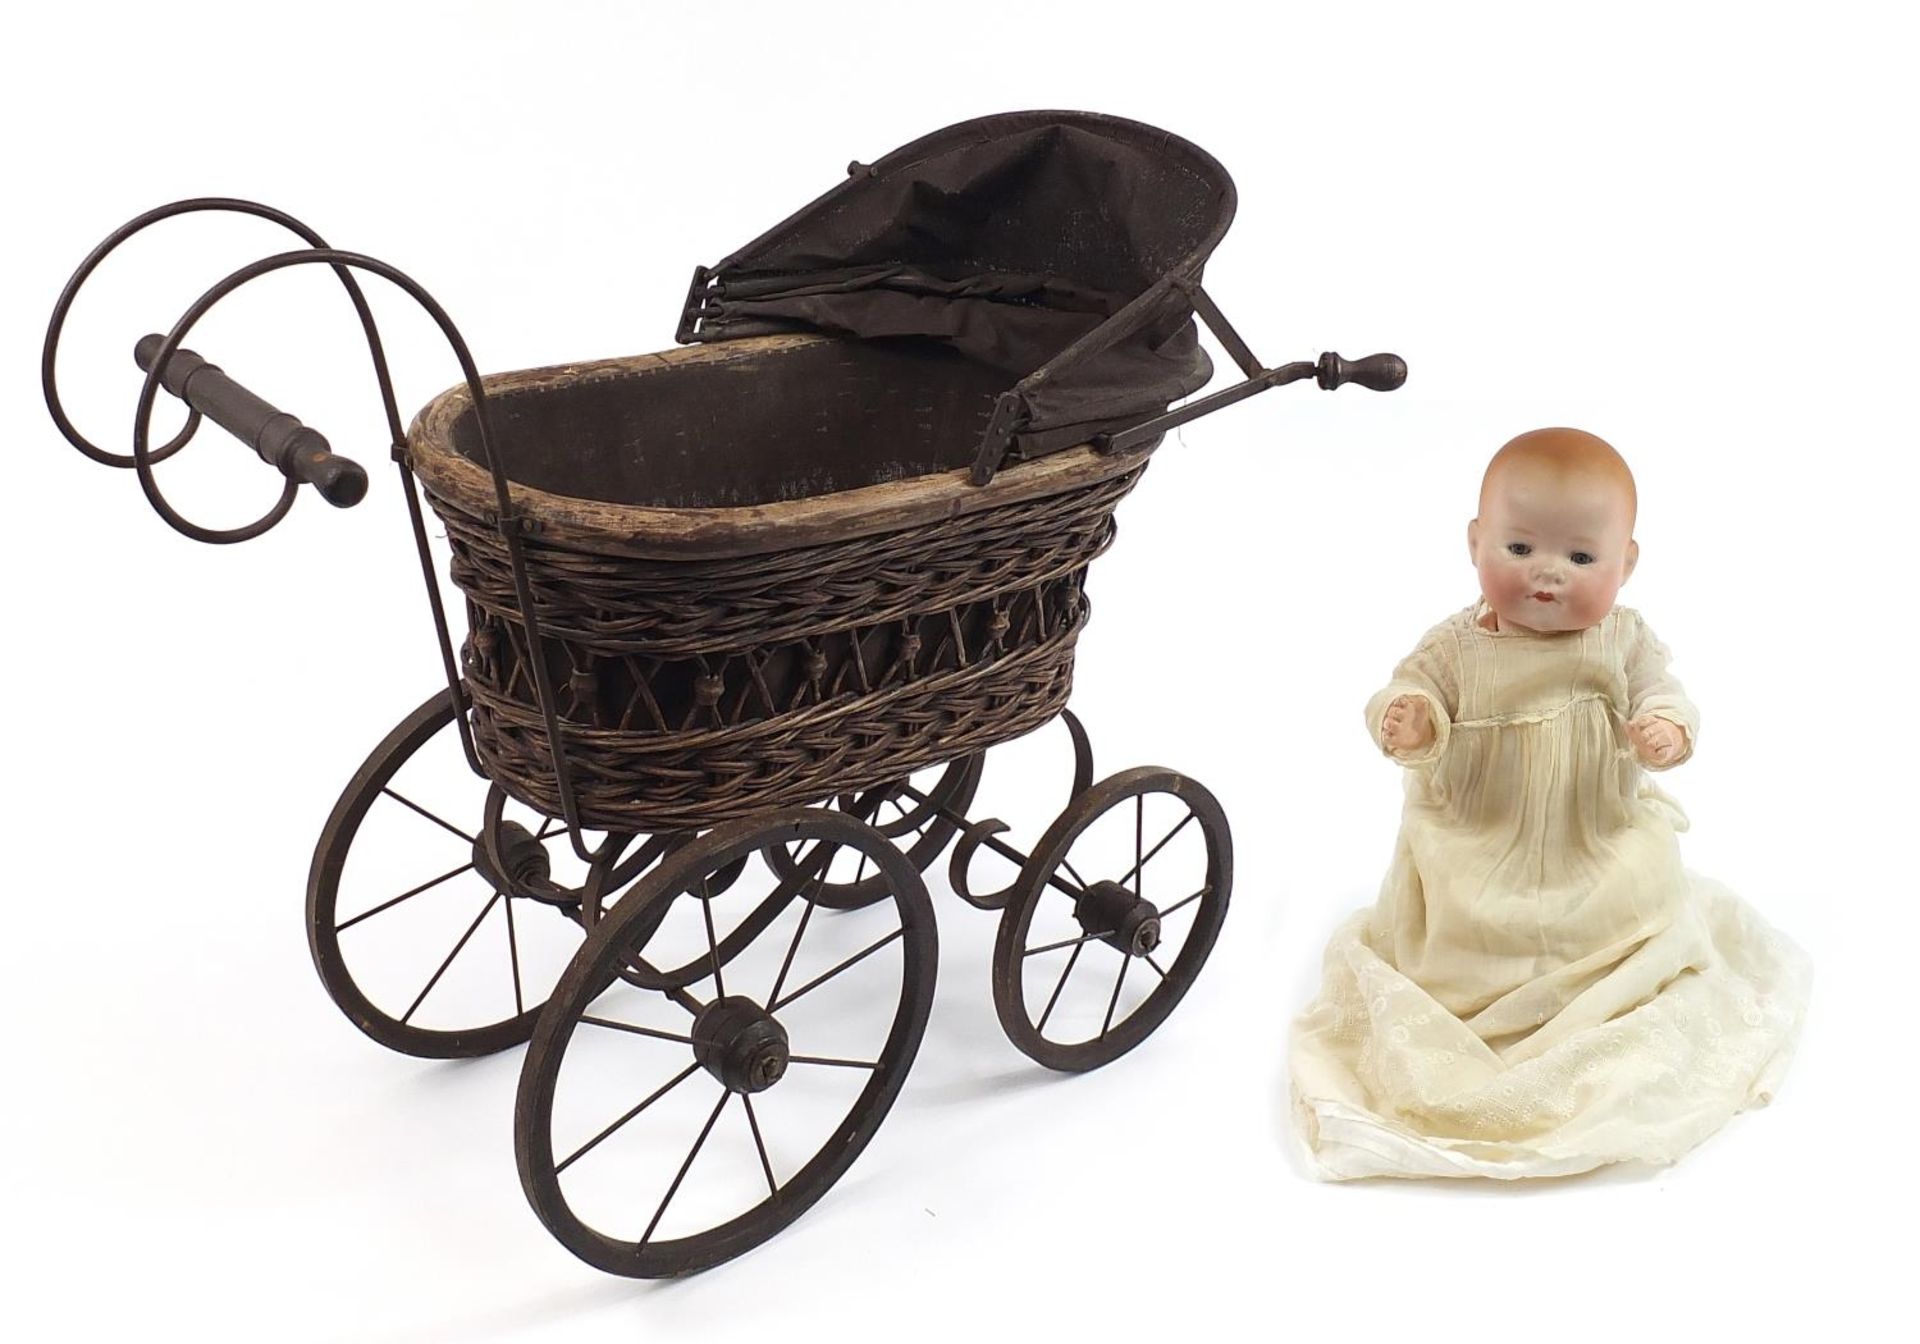 German Koppelsdorf bisque head doll with open close eyes and a Victorian doll's pram, 73cm in length